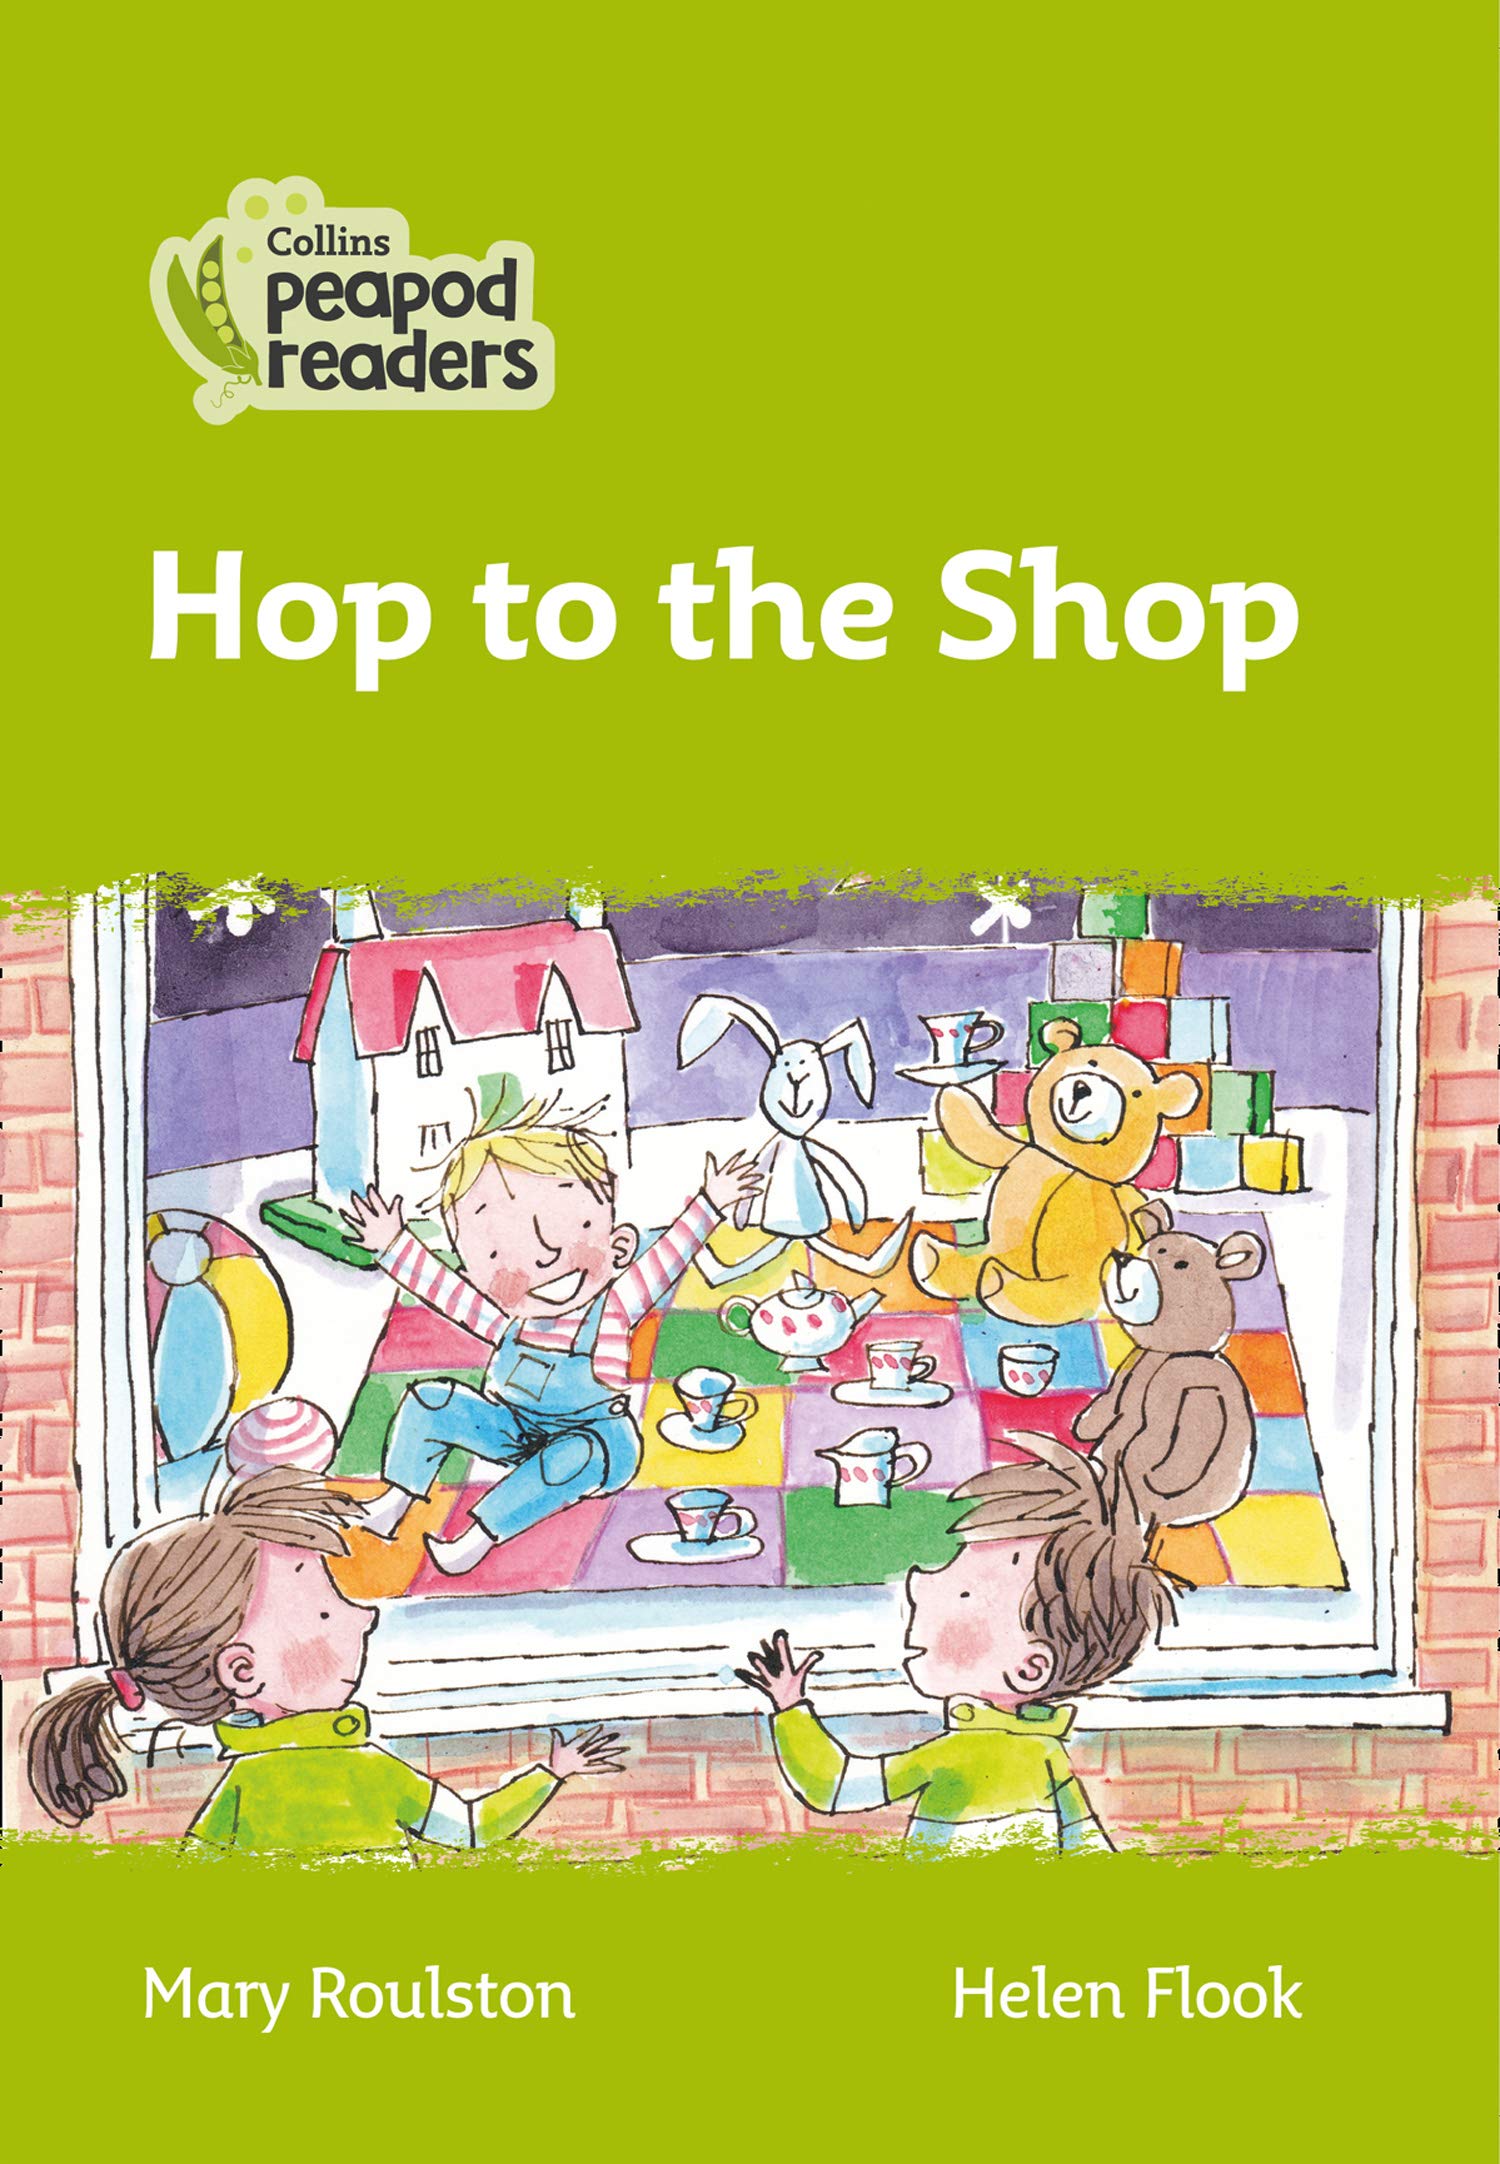 Level 2 – Hop to the Shop | Mary Roulston